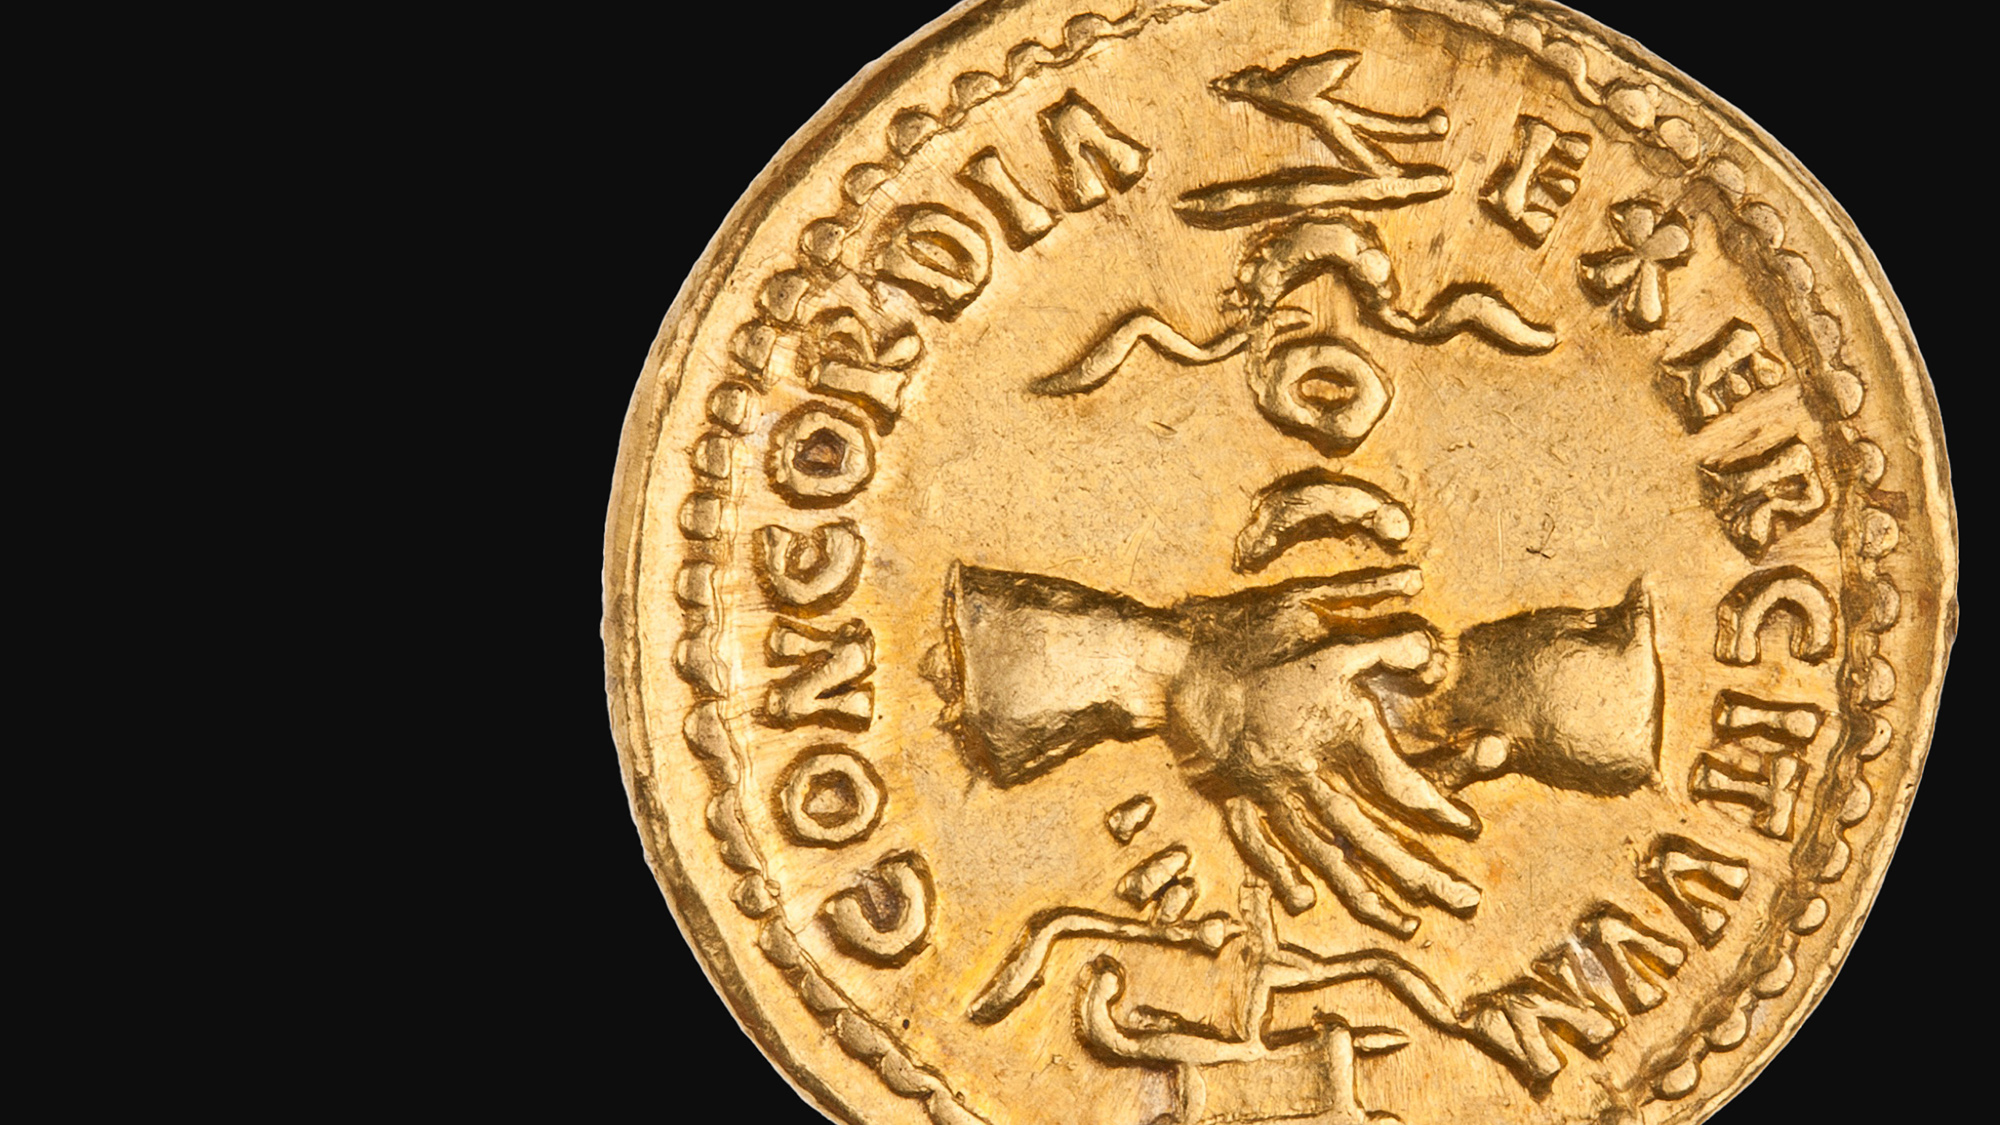 Long Table 170. The Imperial Coinage of Nerva, Part 1: Nerva as Supreme Military Commander